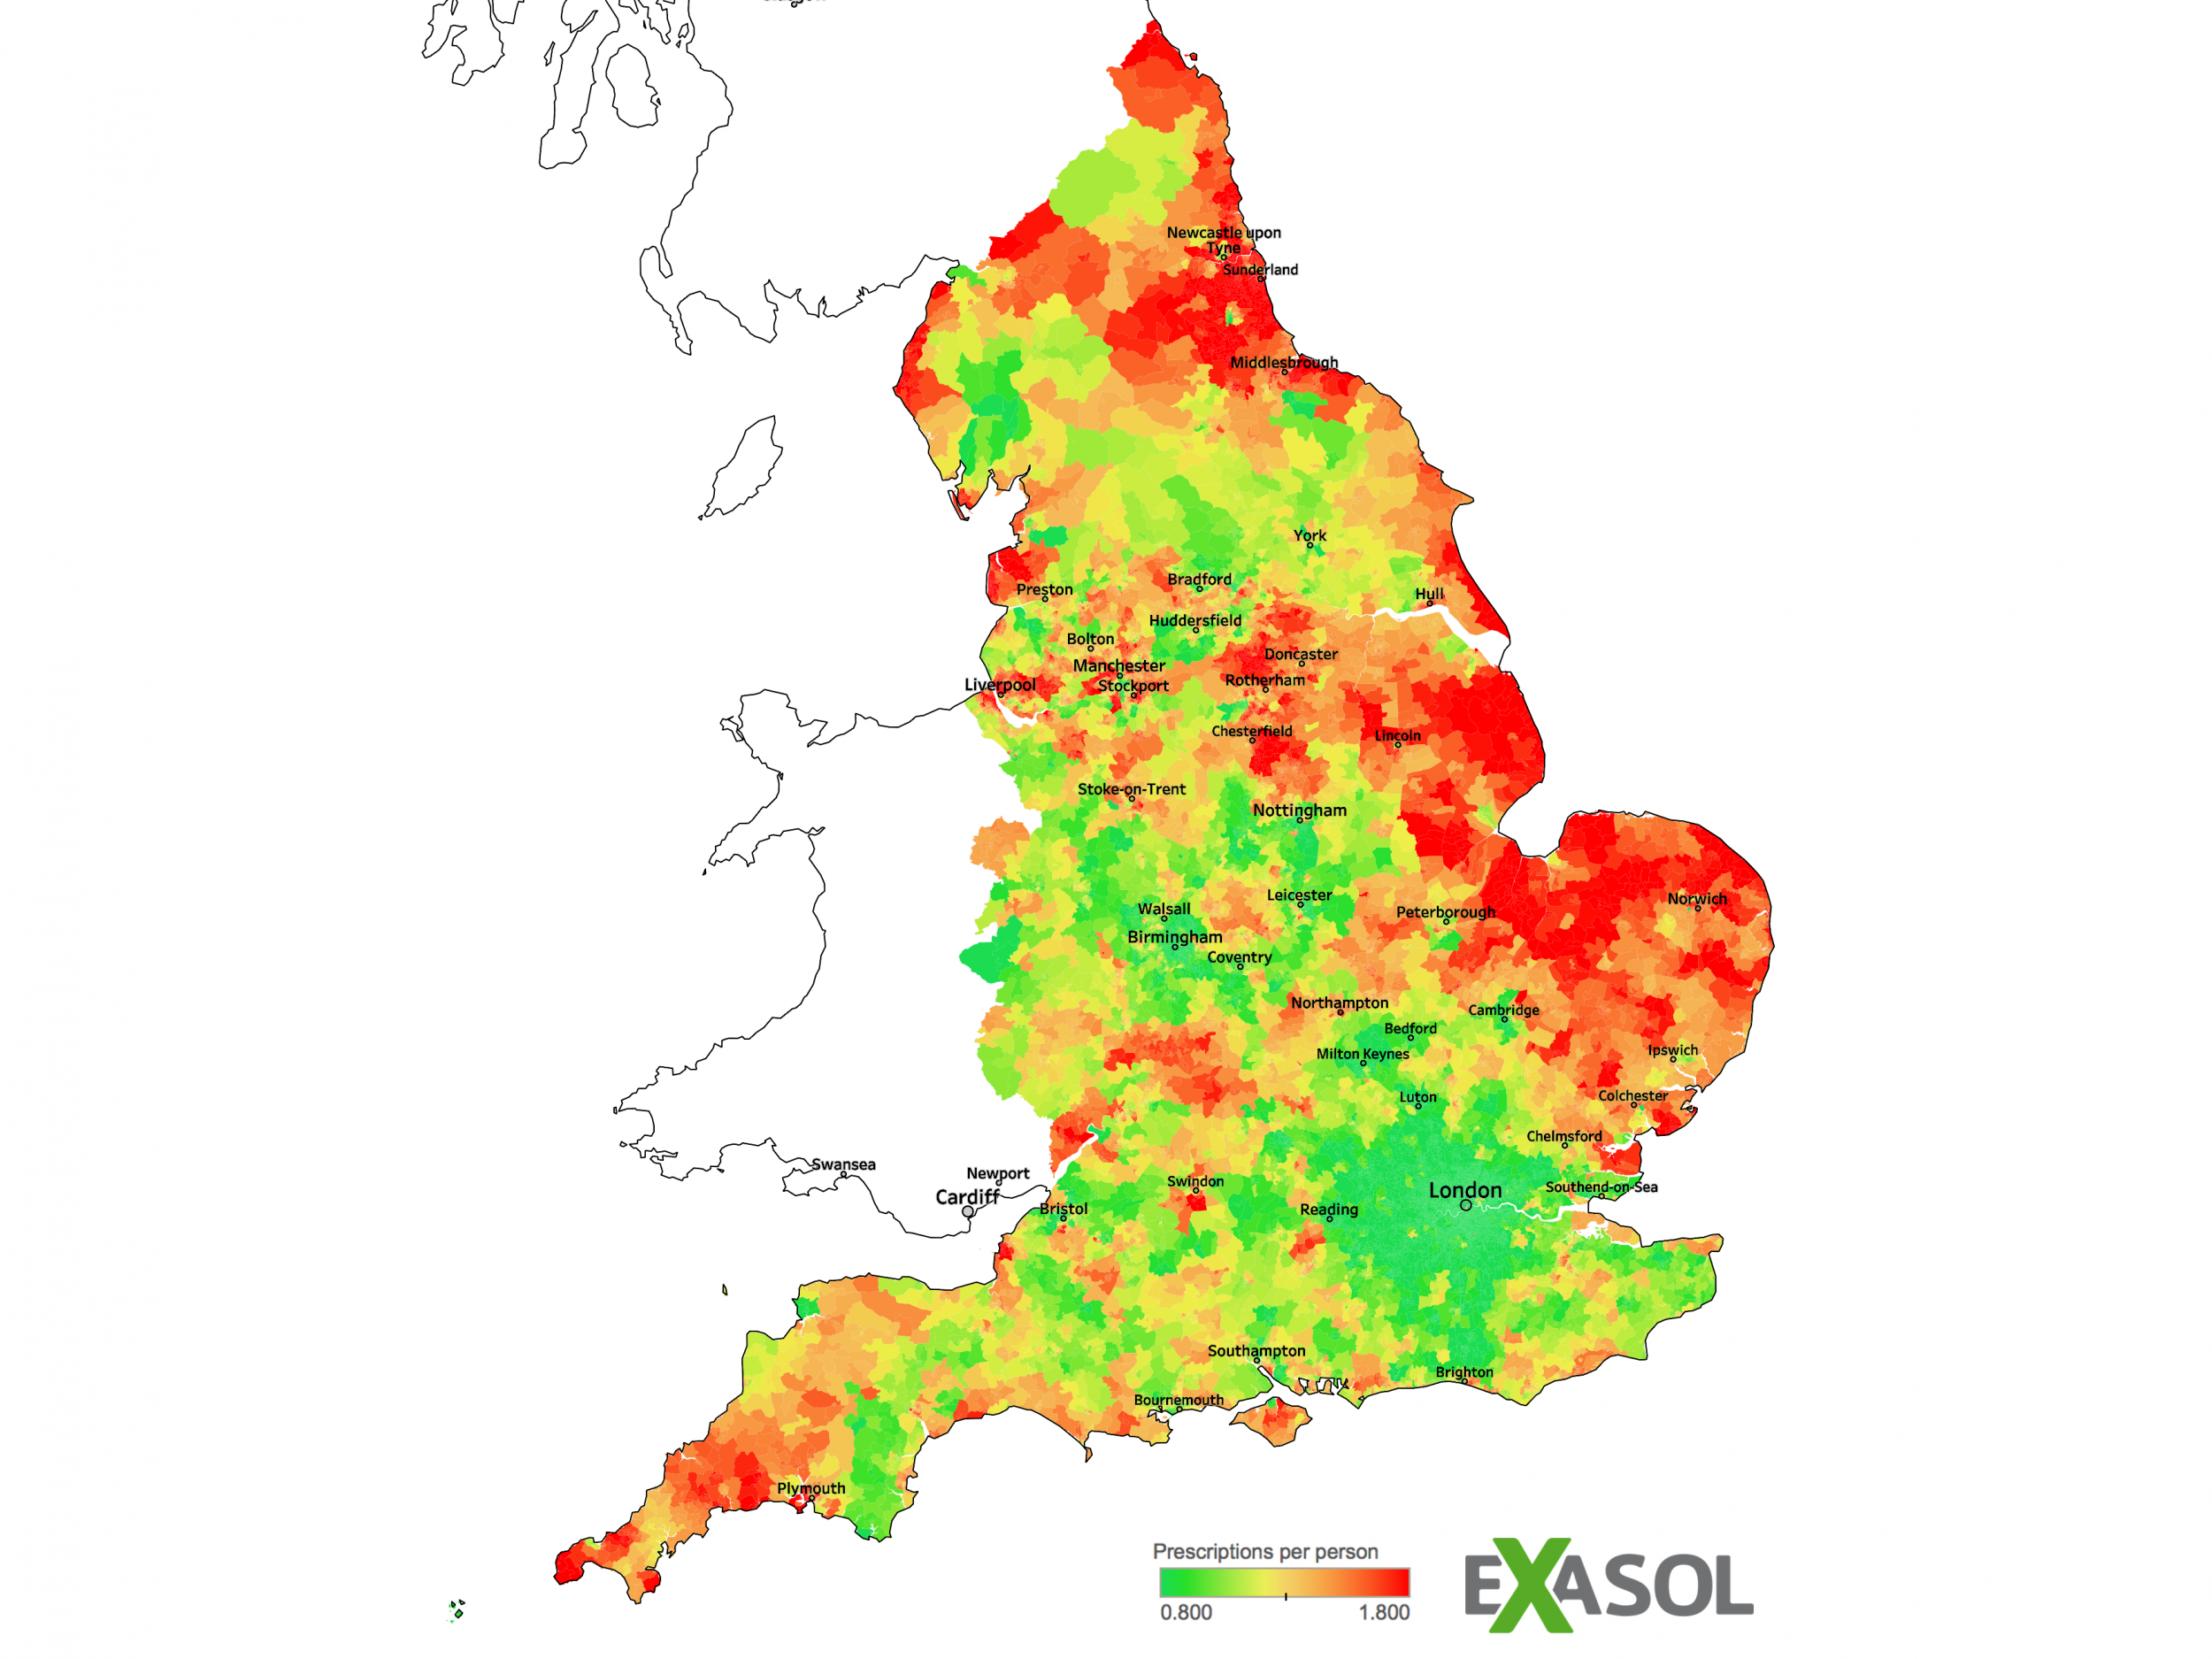 North East prescribes twice the number of antidepressants per person as the South East and London